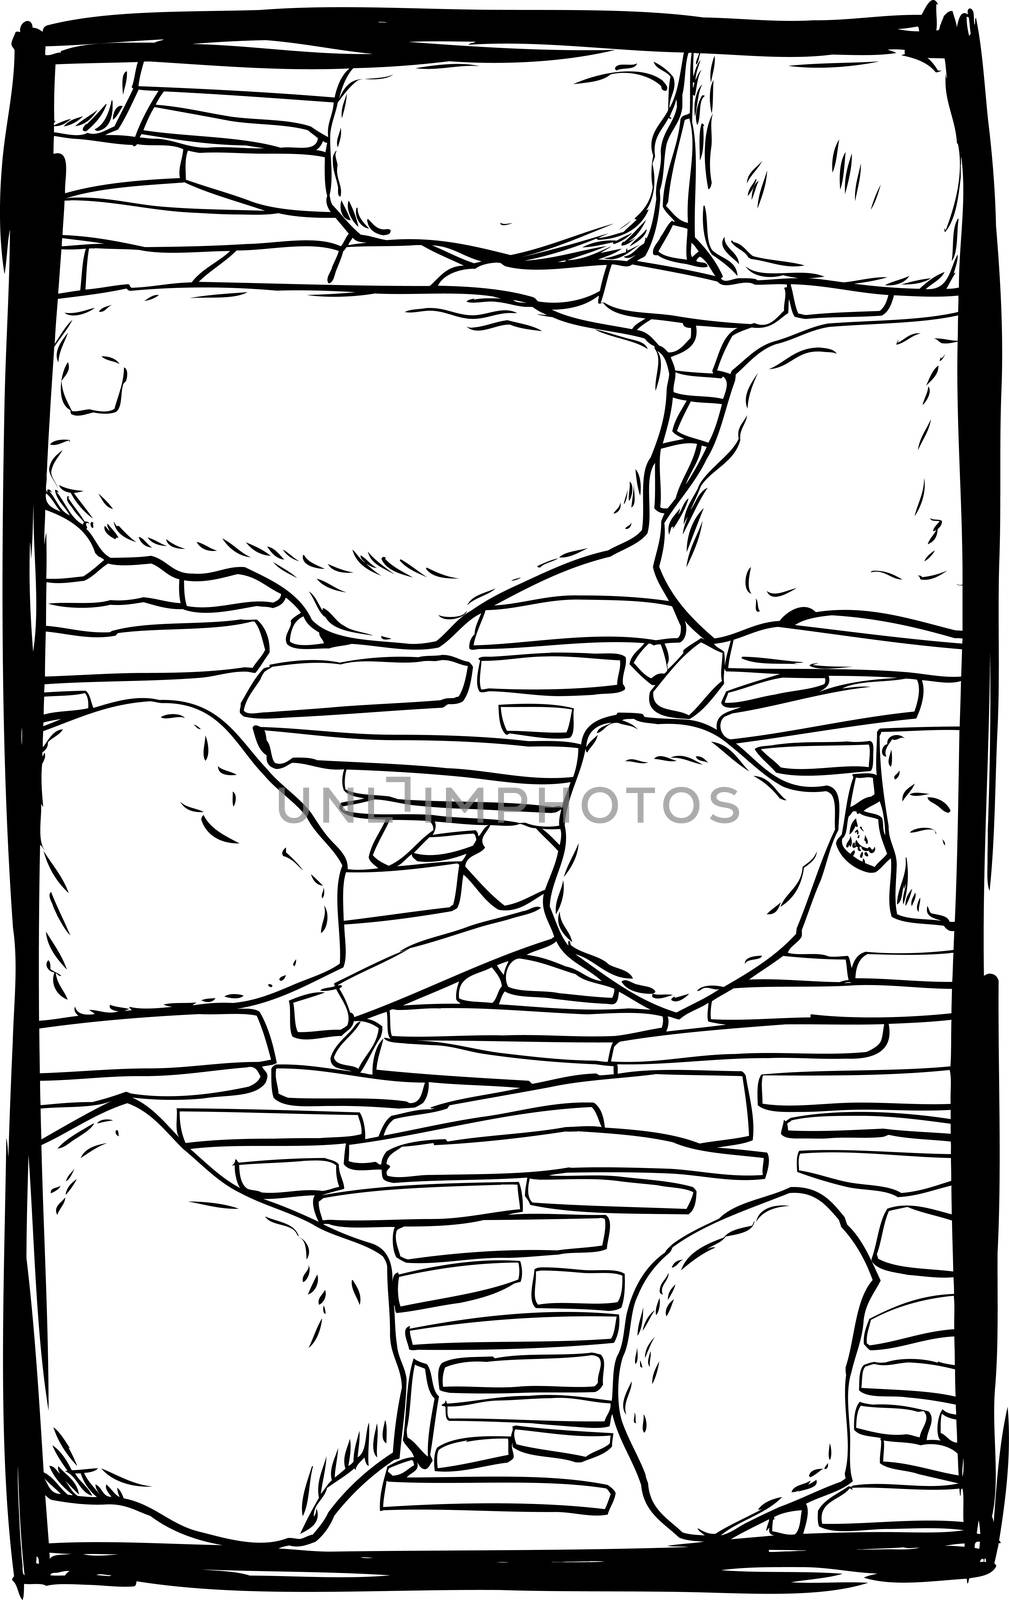 Outlined old stone and dirt filled wall inside sketched frame